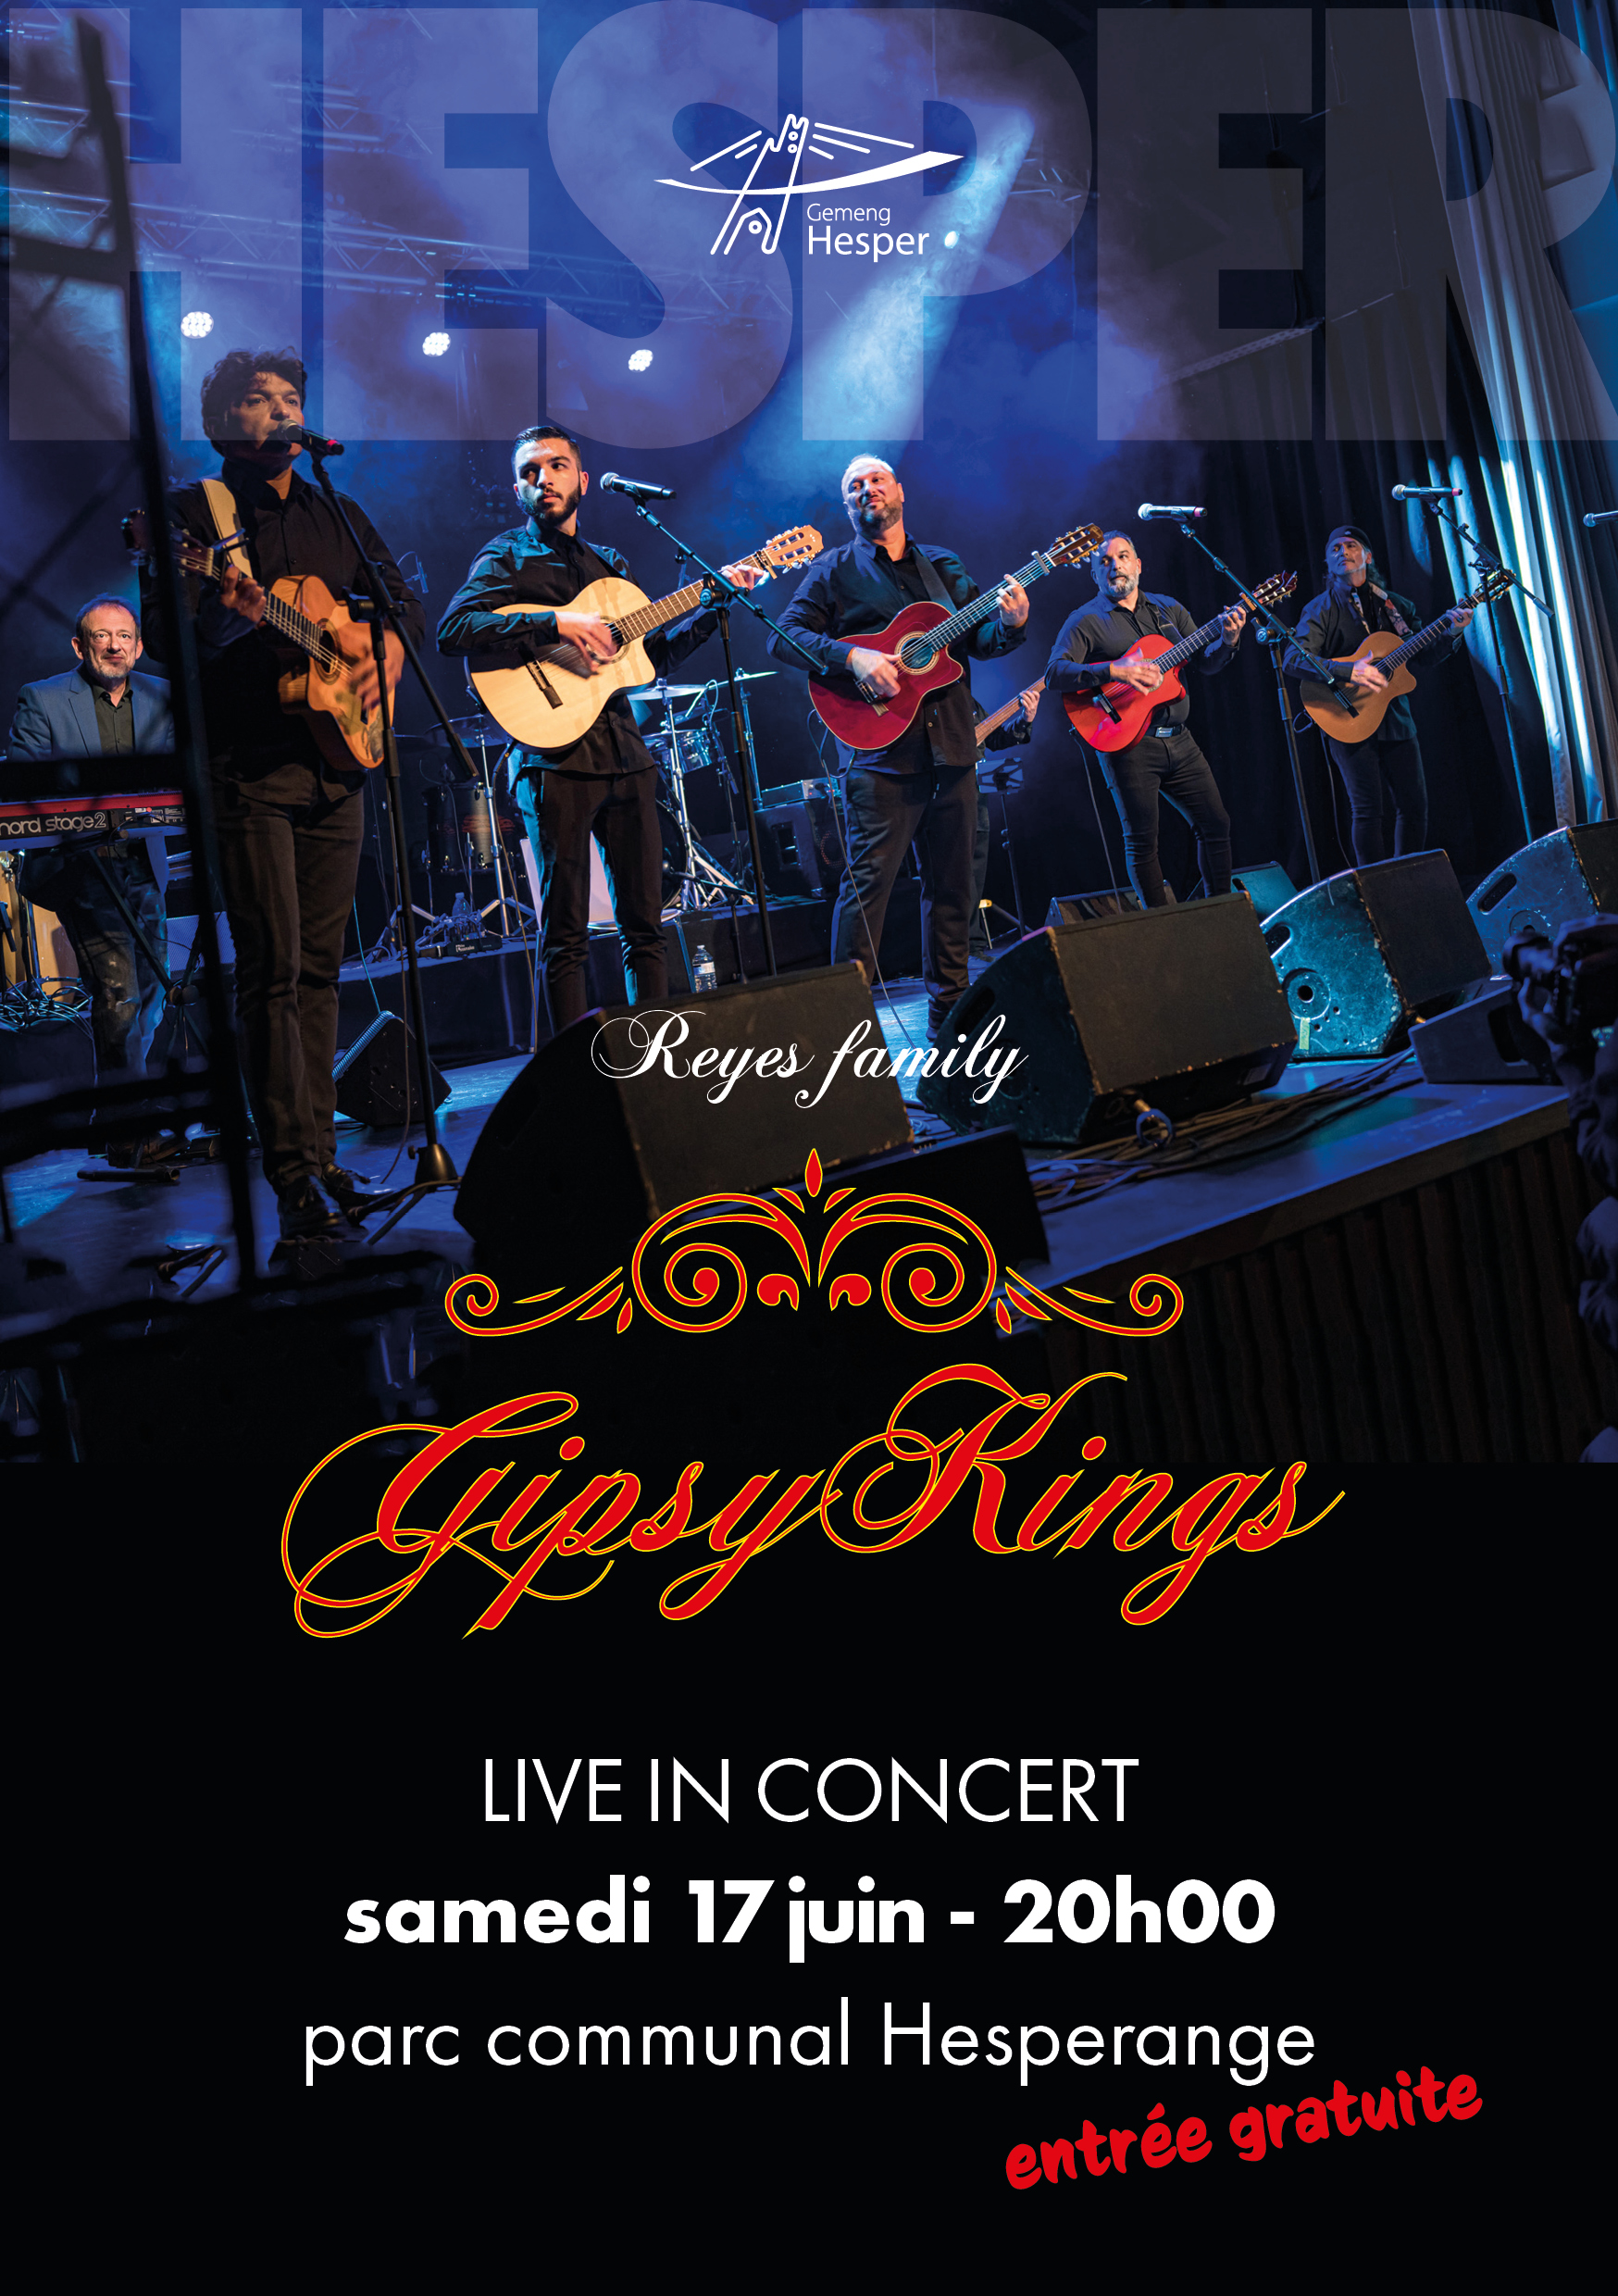 Gipsy Kings by the Reyes familiy